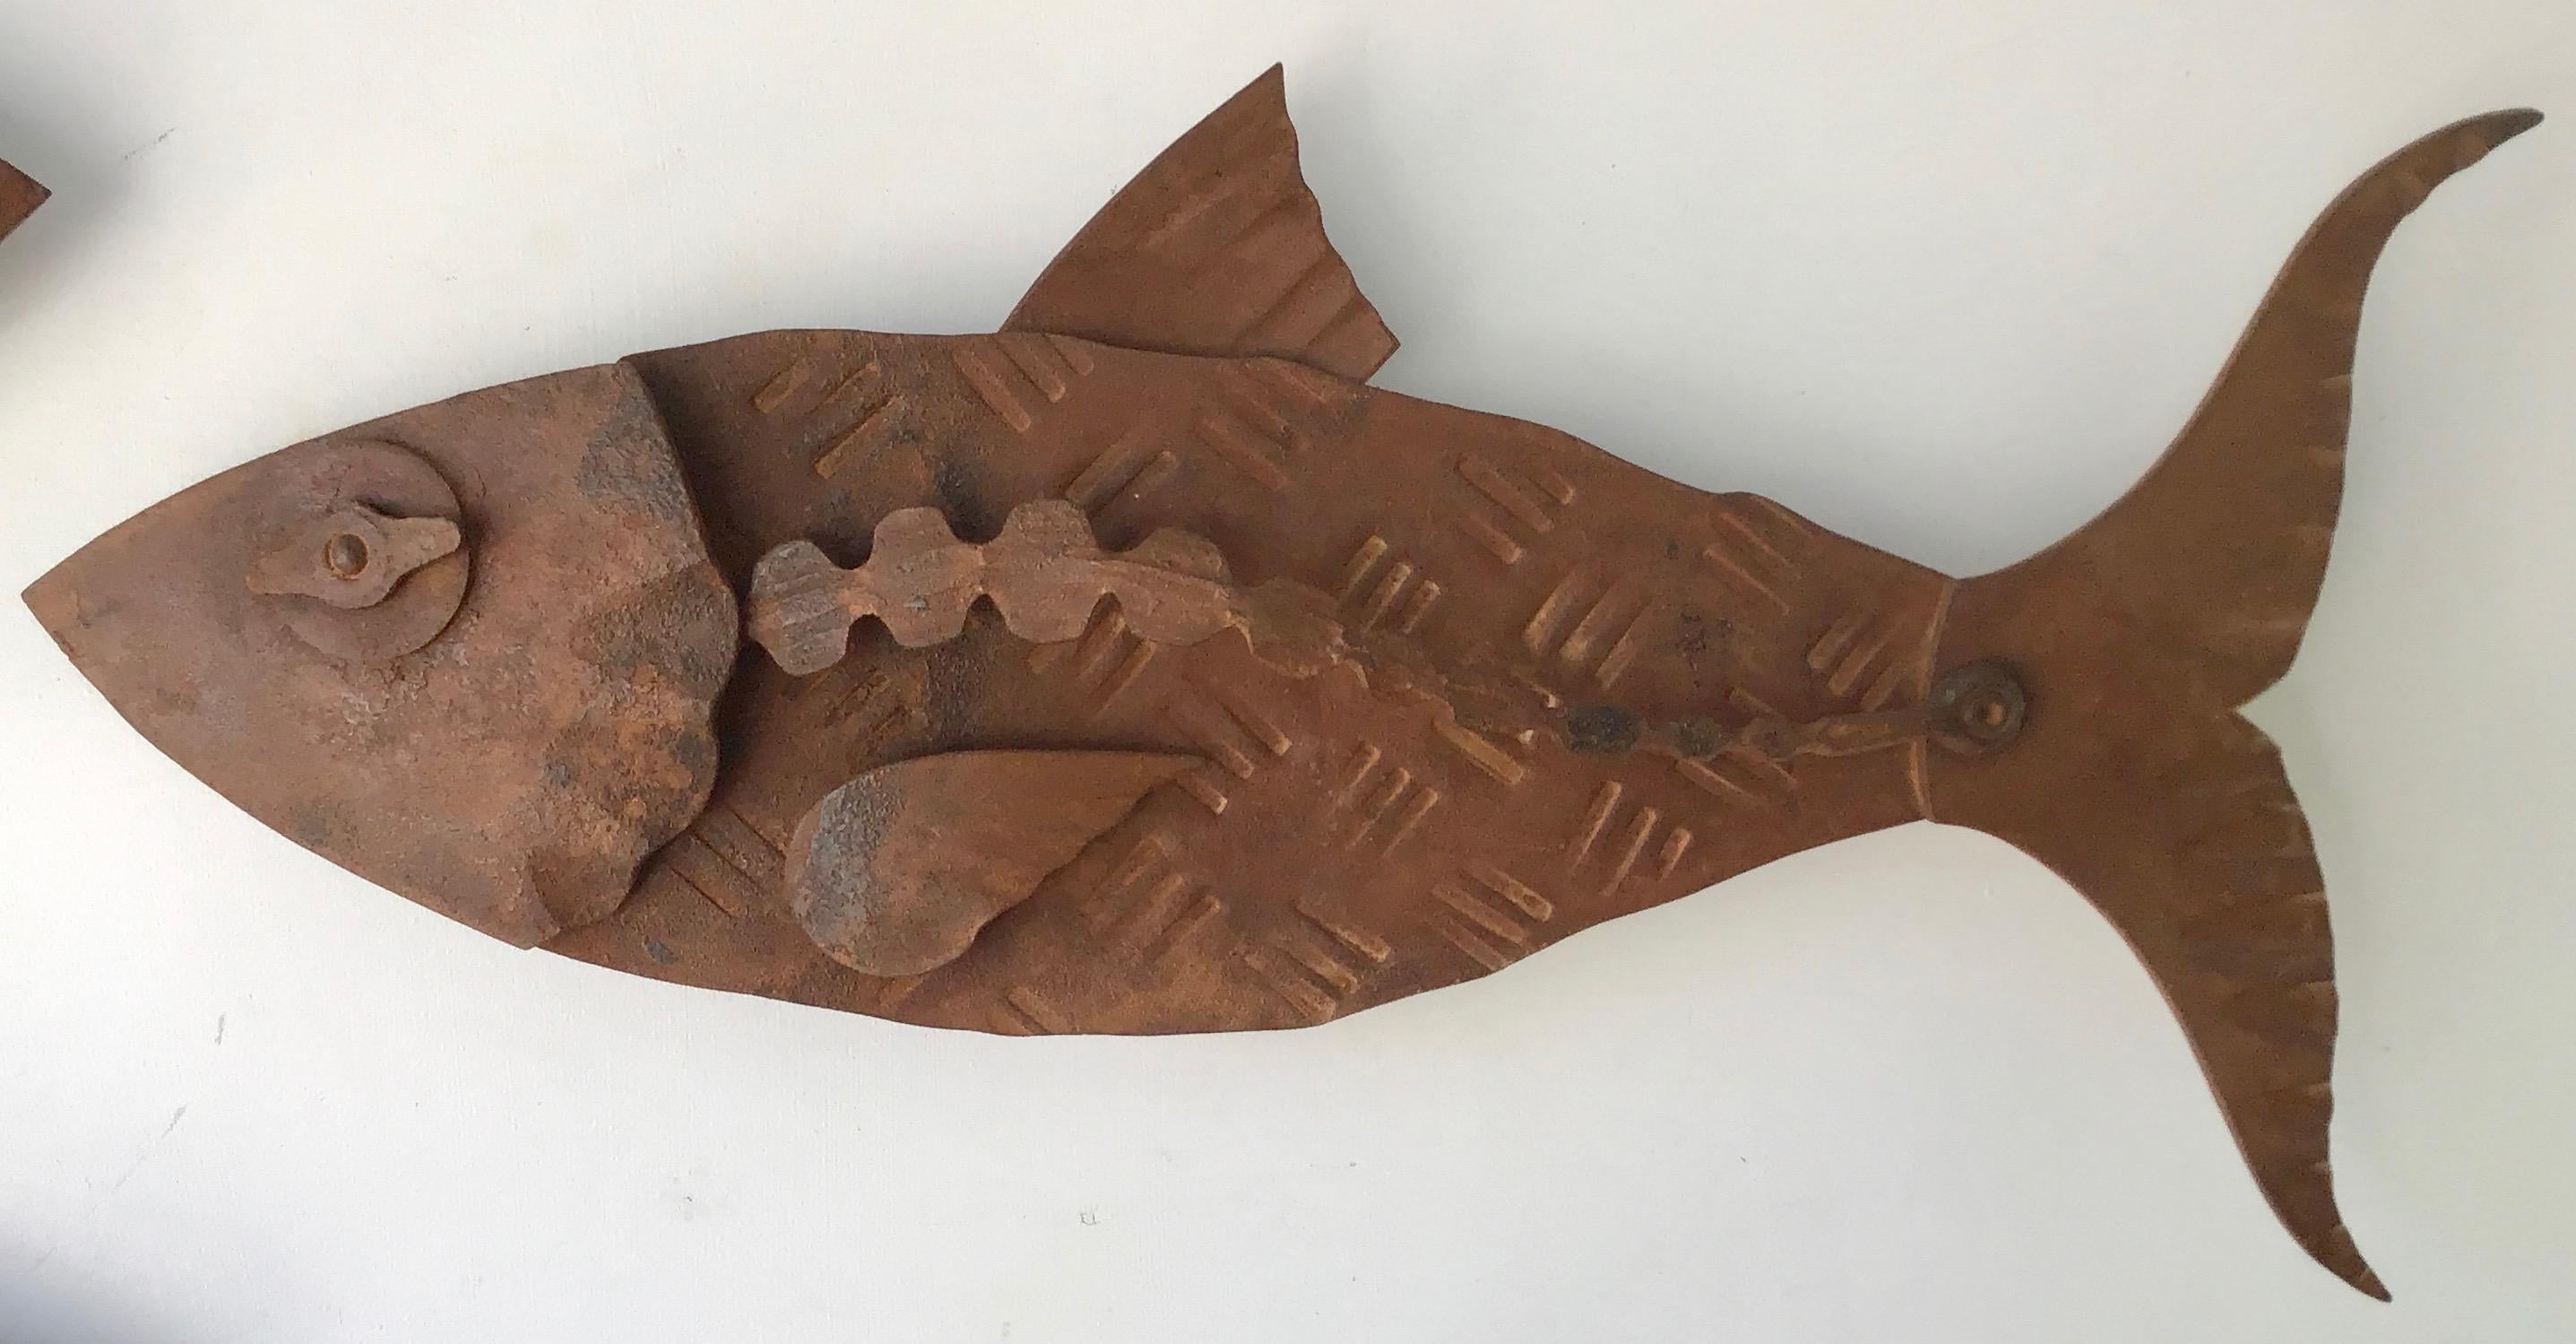 "Alubulidae 3" Hand forged salvaged steel fish wall sculpture